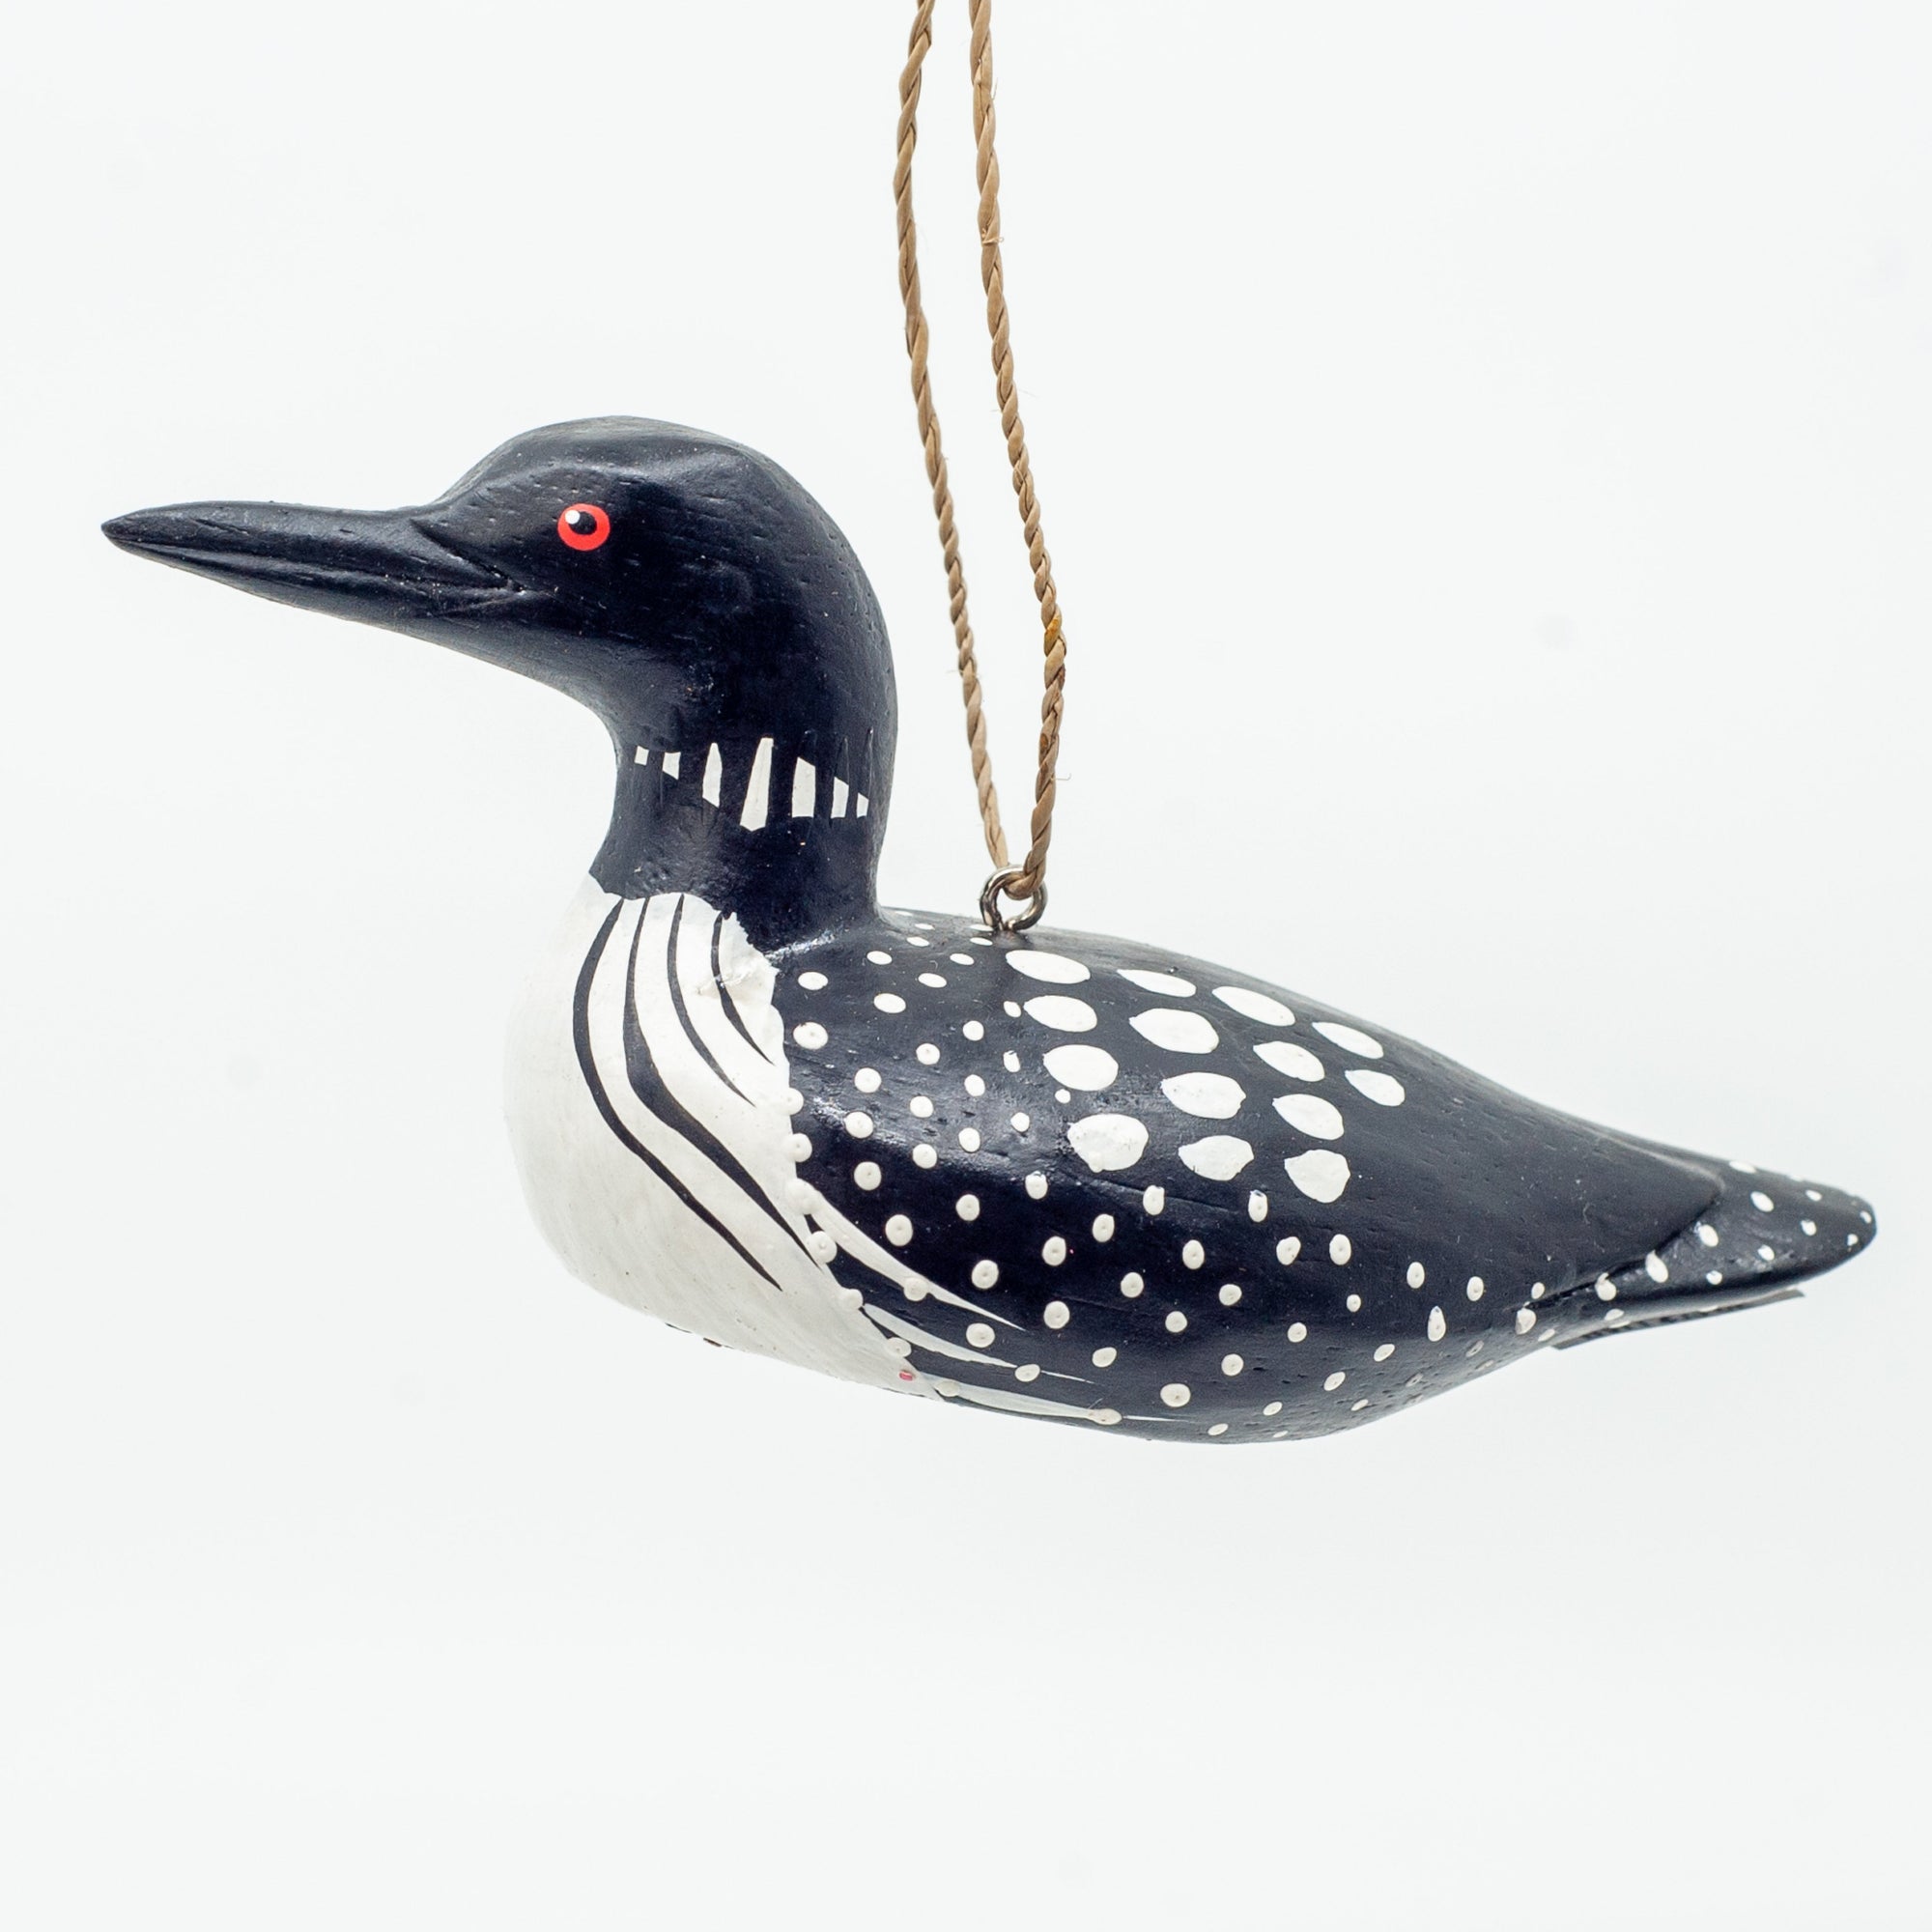 Small wooden loon ornament on white background hanging from string. 